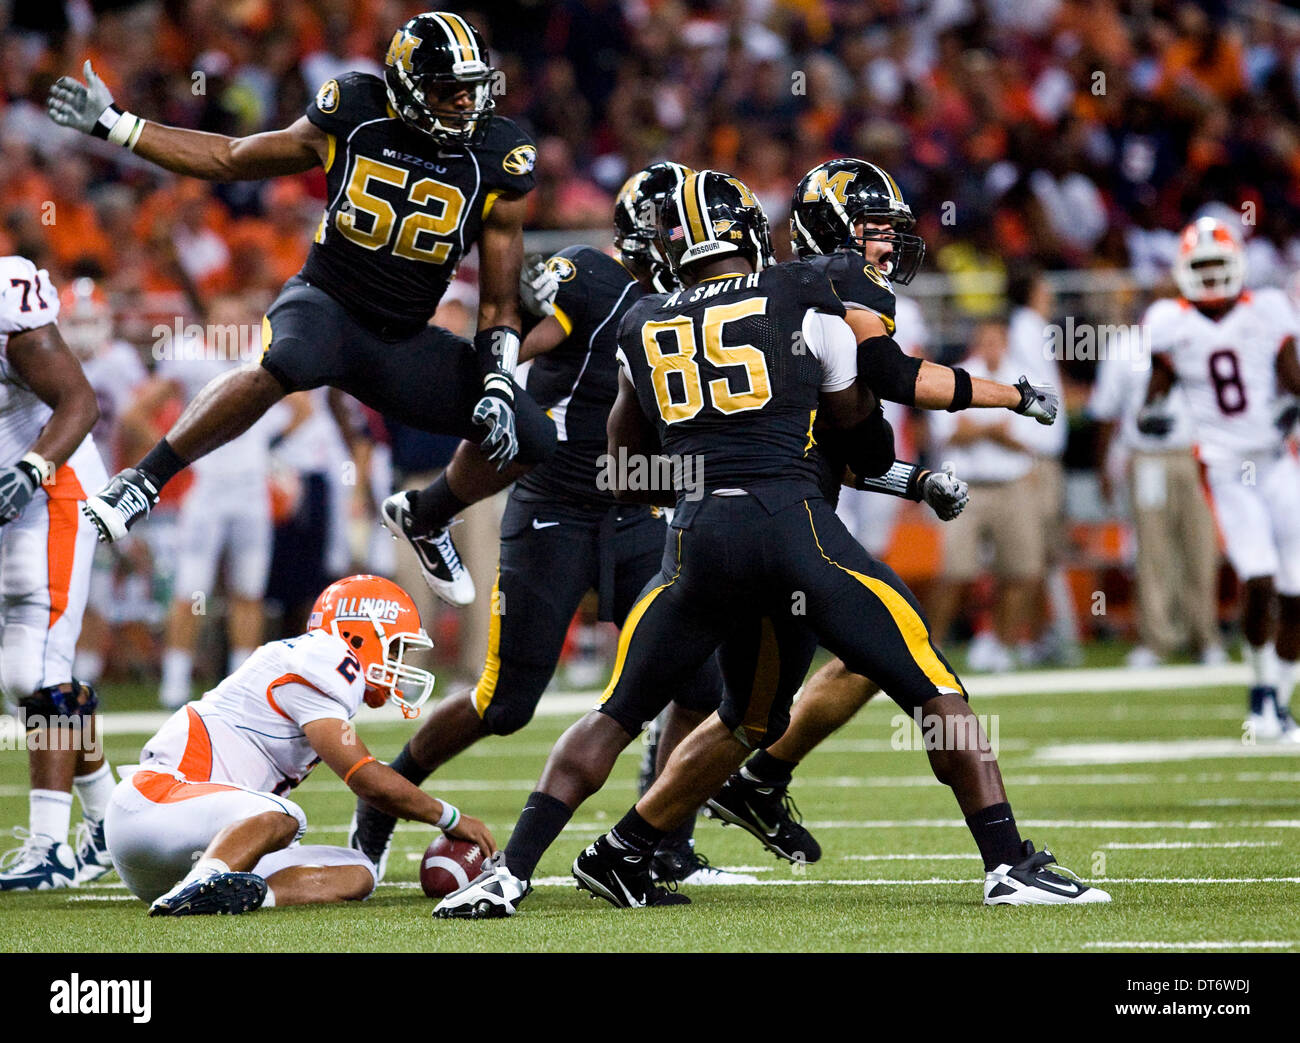 St. Louis, Missouri, USA. 10th Feb, 2014. Missouri Tigers defensive lineman Brad Madison (57), right, celebrates with teammate Aldon Smith (85), while defensive lineman Michael Sam (52) jumps into the air during the second half of the Arch Rivalry NCAA football game between the Mizzou Tigers and Fighting Illini at the Edward Jones Dome in St. Louis, Mo., Saturday, September 4, 2010. Missouri defeated Illinois 23-13 © csm/Alamy Live News Stock Photo